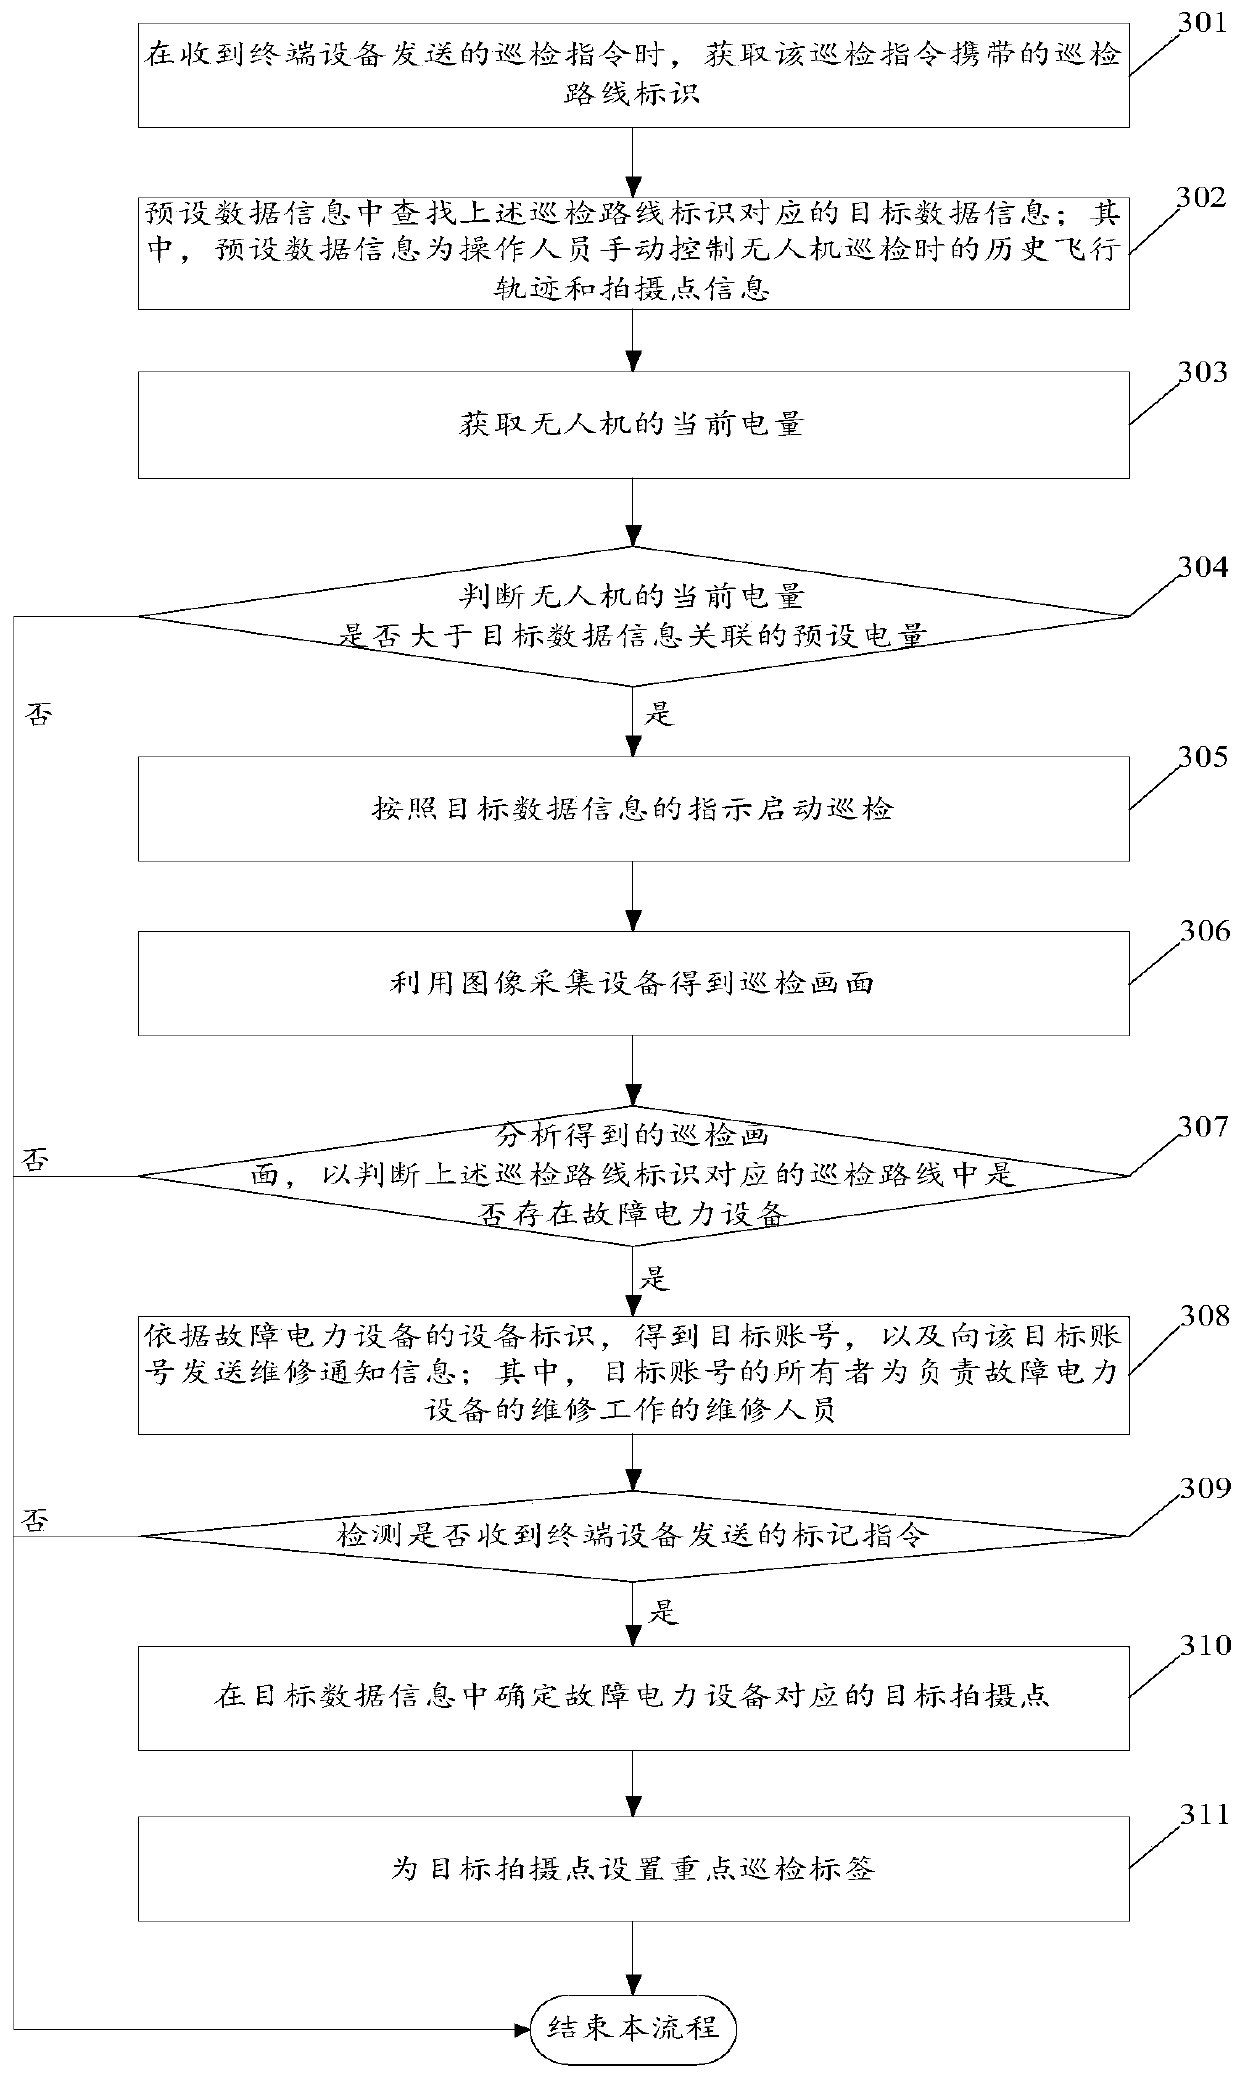 Unmanned aerial vehicle based power patrol inspection method and system